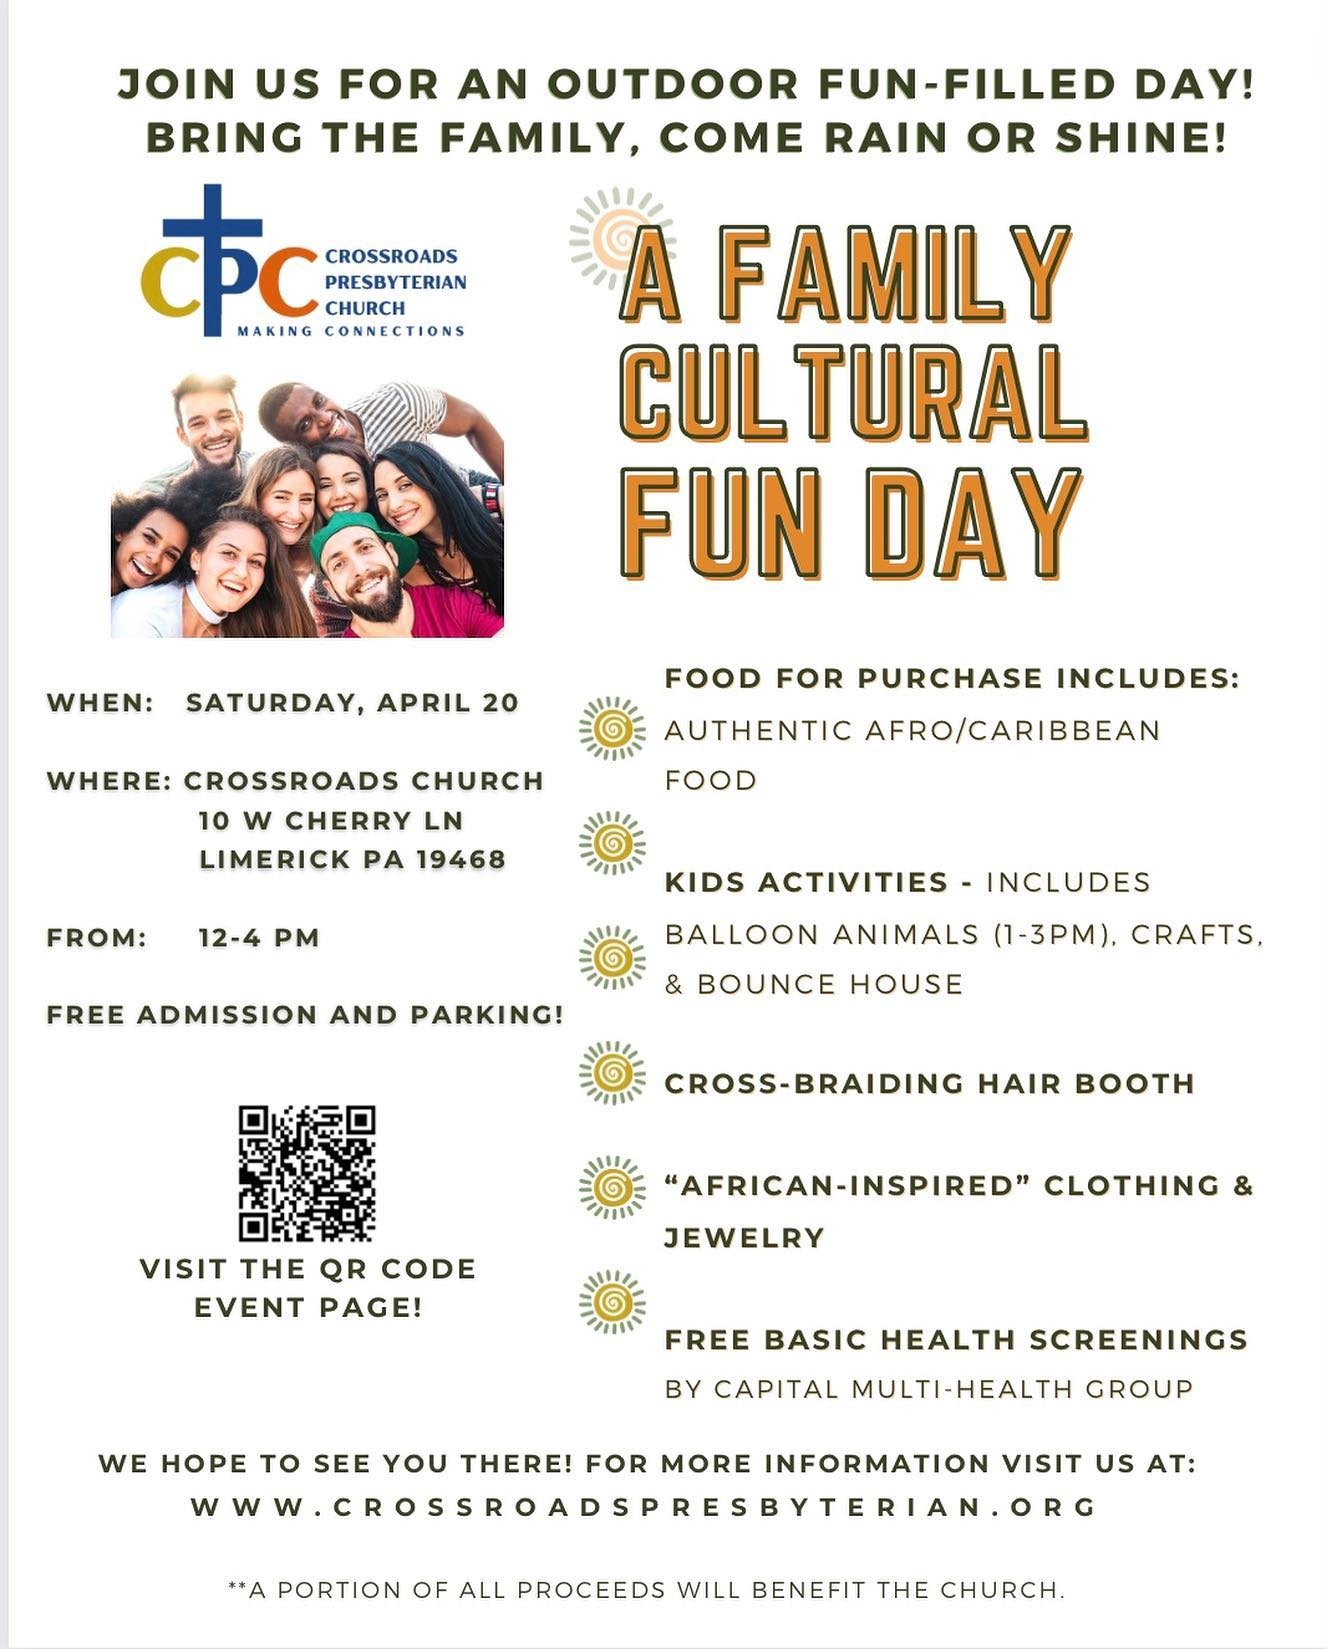 The weather is looking good for Saturday, 4/20!  Come out and see us at our Cultural Family Fun Day from 12pm to 4pm at Crossroads Presbyterian in Limerick! **Activities for the kids, Afro-Caribbean food, hair braiding, African inspired clothing and 